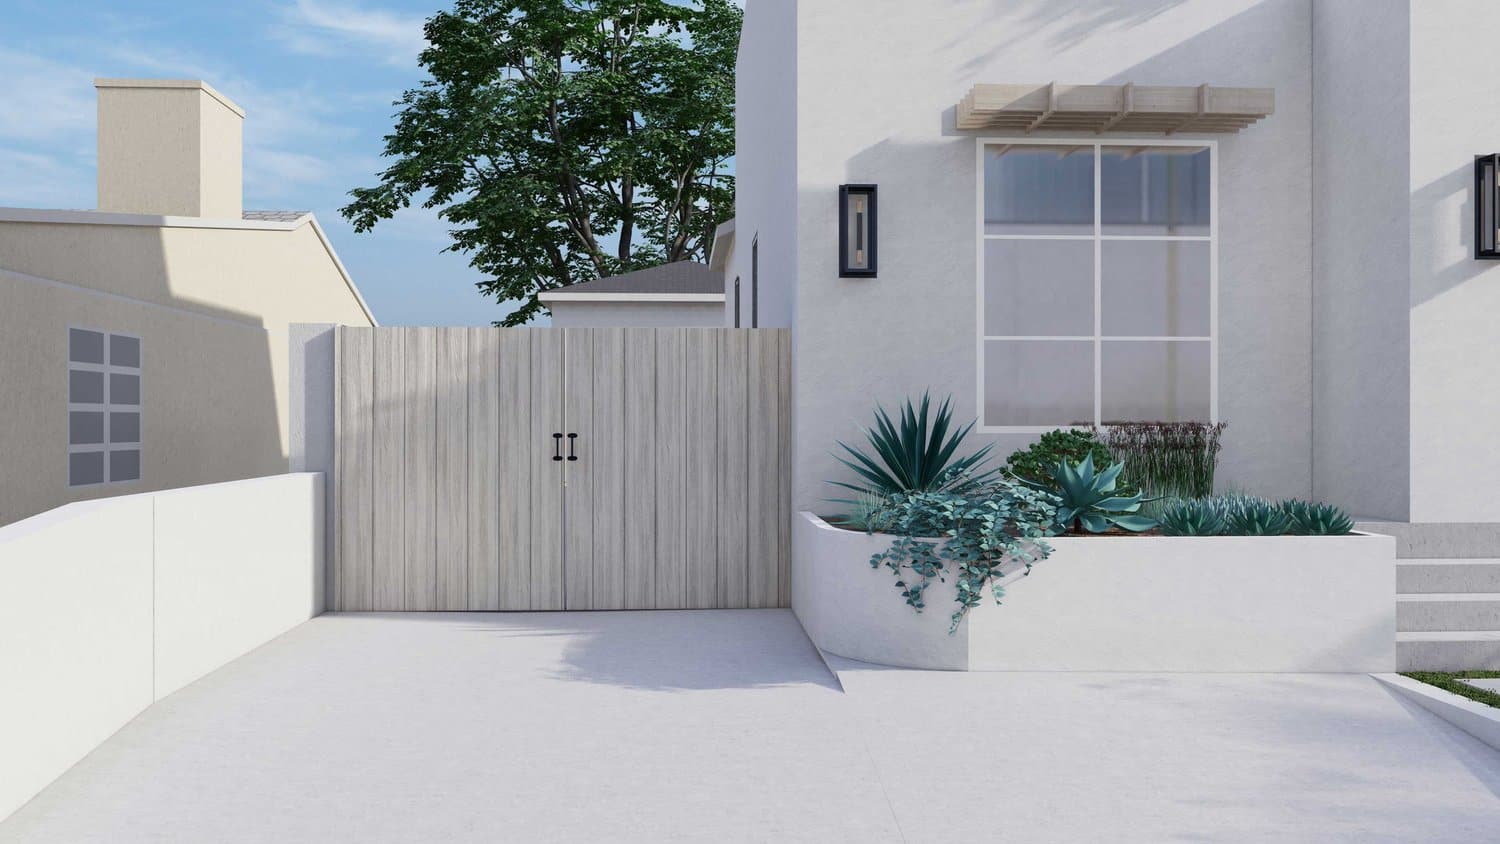 Los Angeles concrete front yard with plants, fence and gate